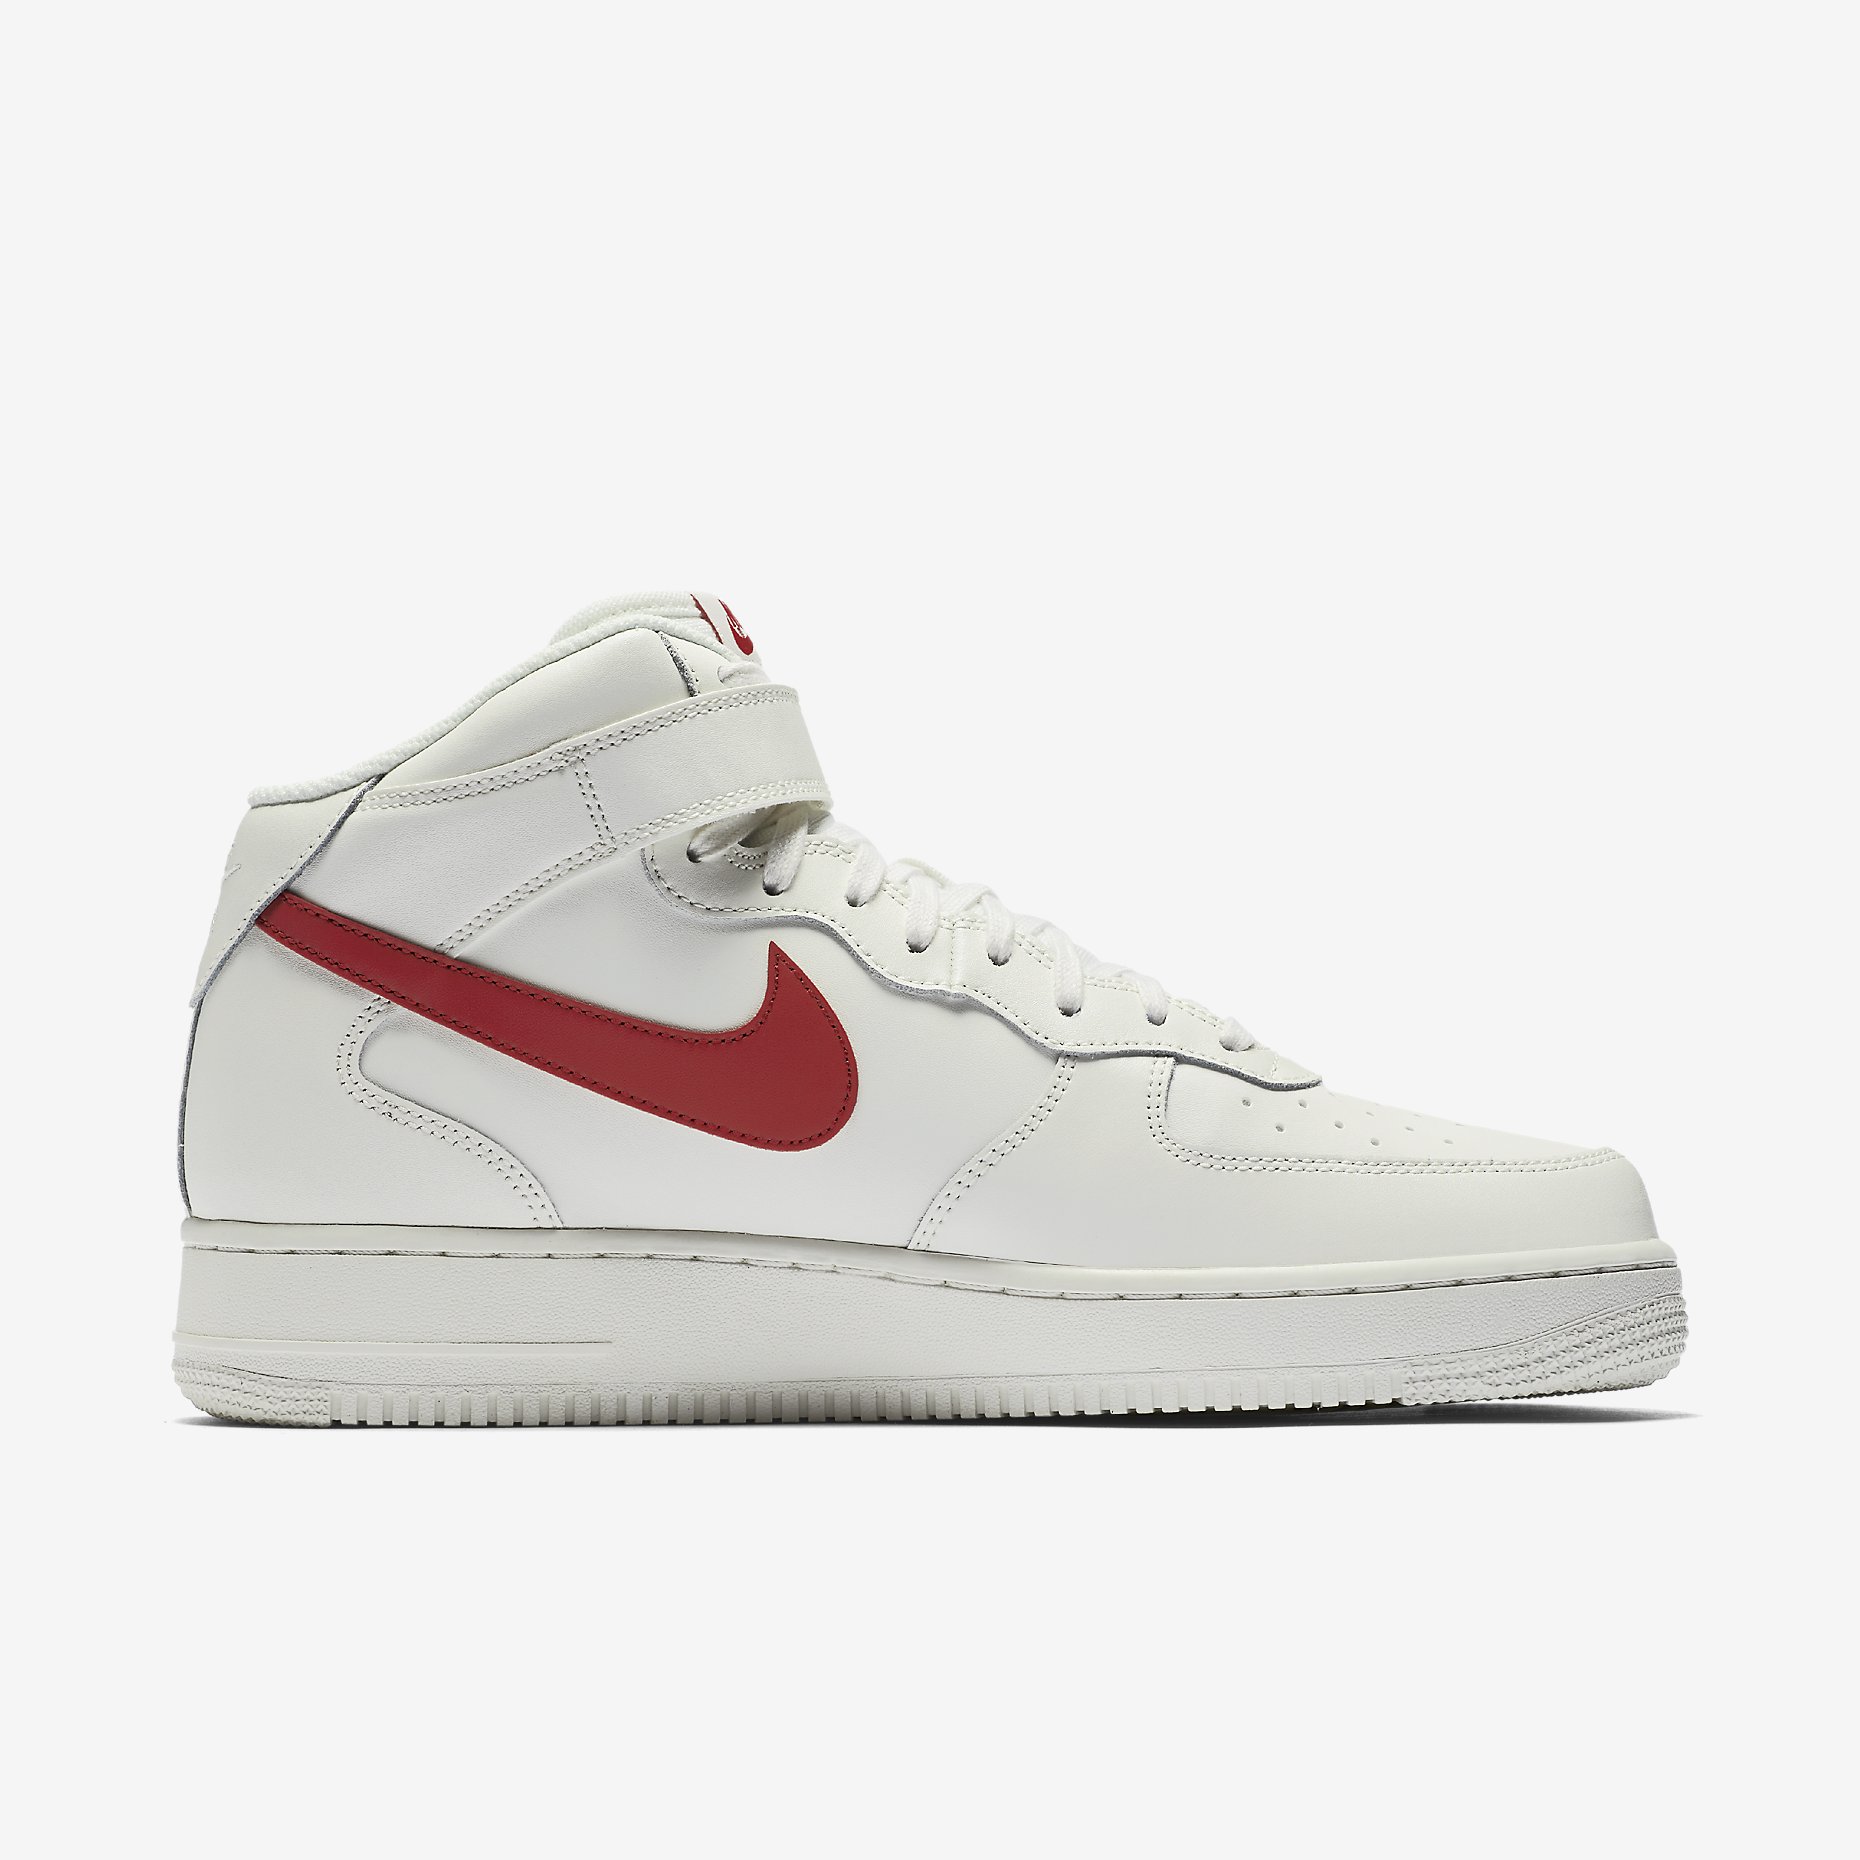 nike-air-force-1-mid-07-sail-university-red-3